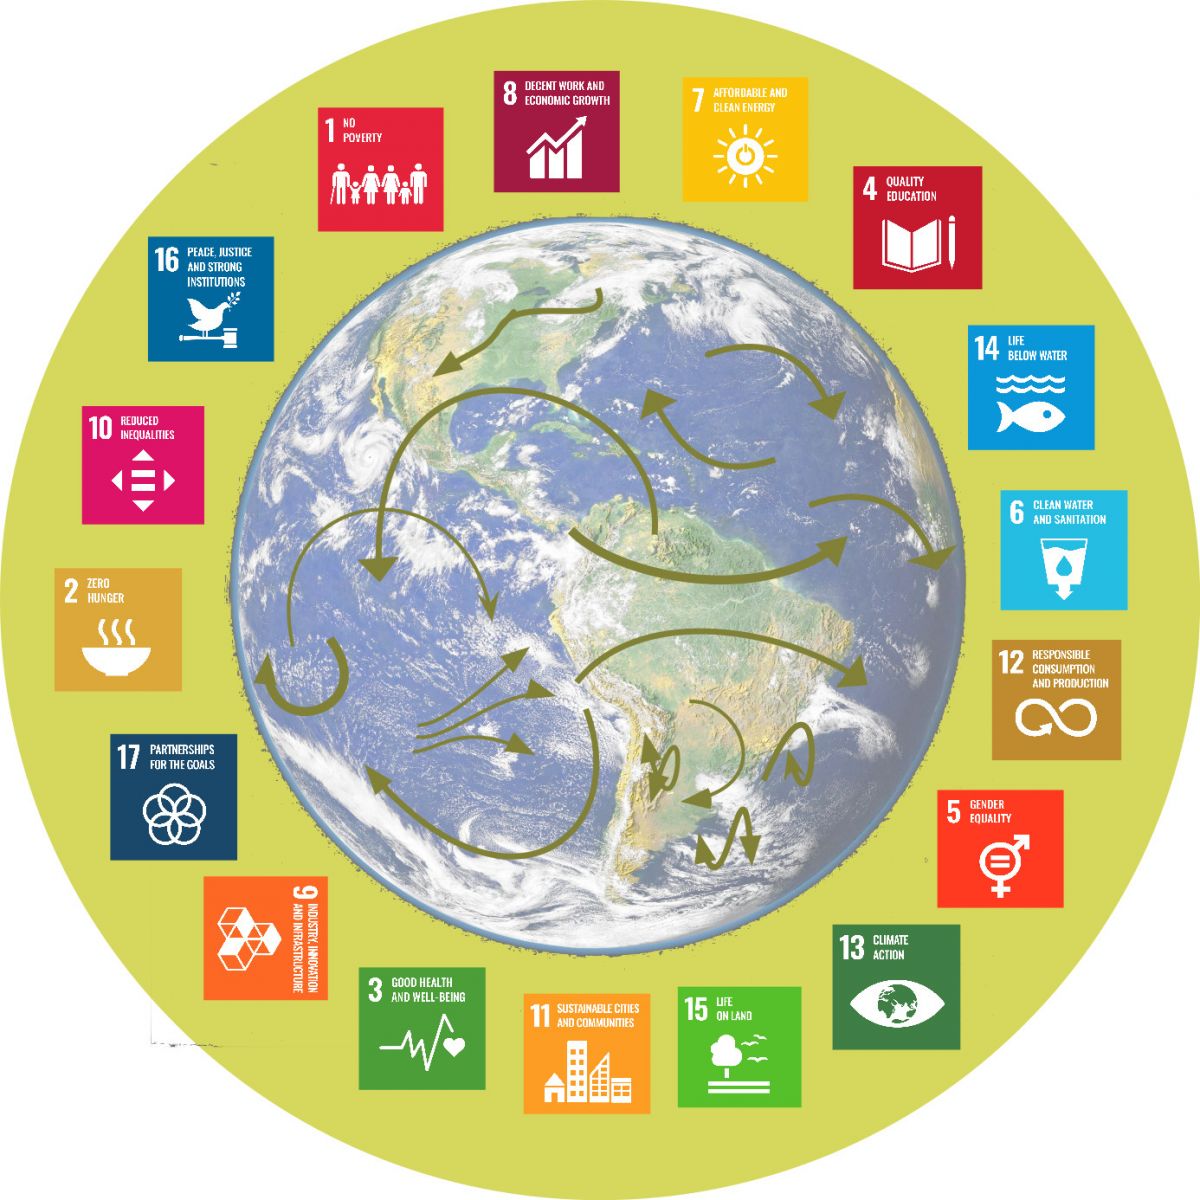 Sustainable development, complexity and change: thinking and practices for the SDG and other objectives<span id="edit_27490"><script>$(function() { $('#edit_27490').load( "/myces/user/editobj.php?tipo=evento&id=27490" ); });</script></span>